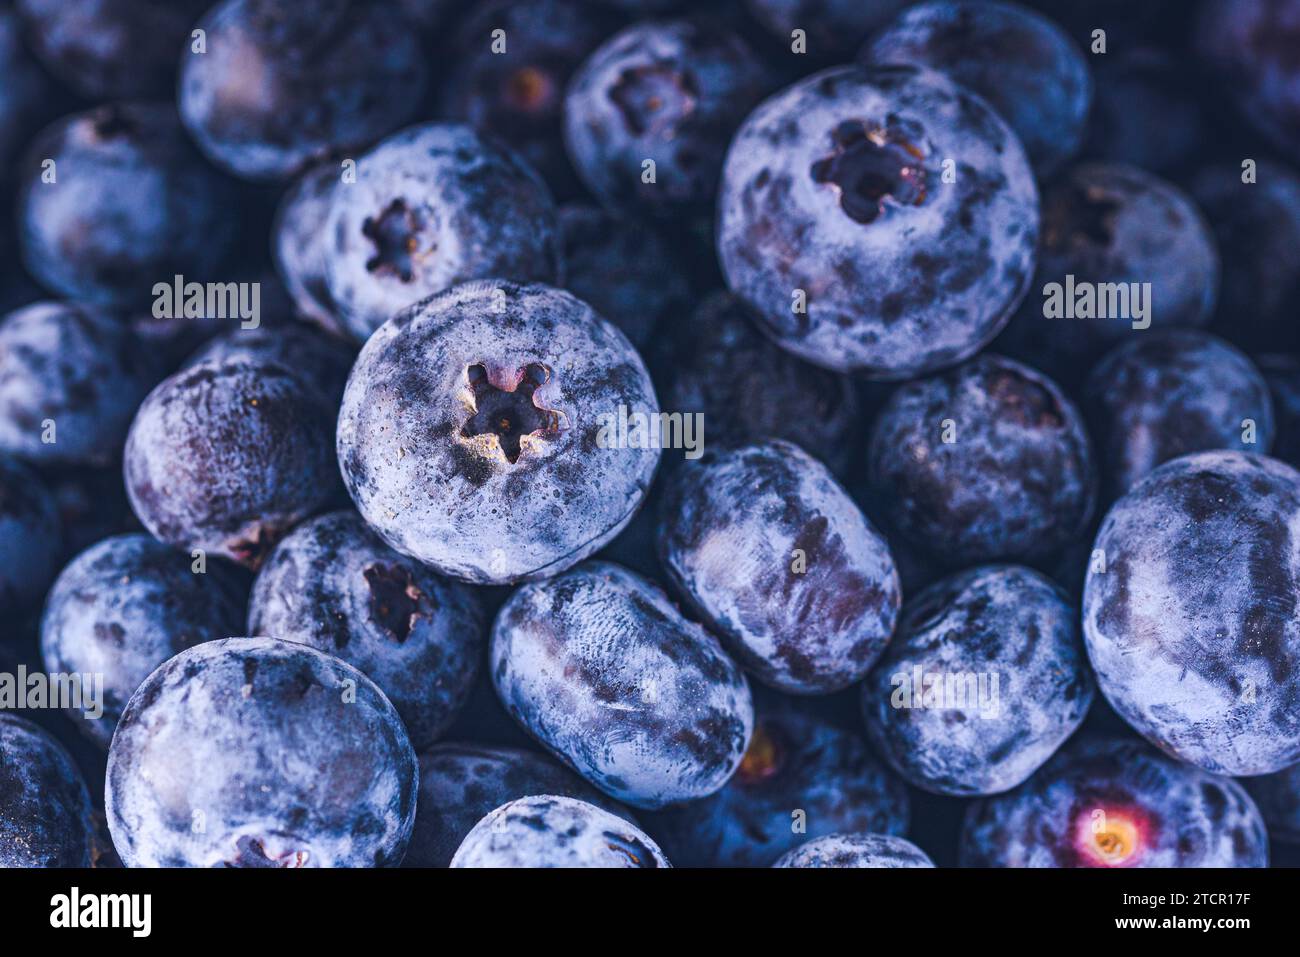 Surface is covered with a thick layer of blueberries. Natural background. bog bilberry (Vaccinium uliginosum), bog blueberry, antioxidant food Stock Photo